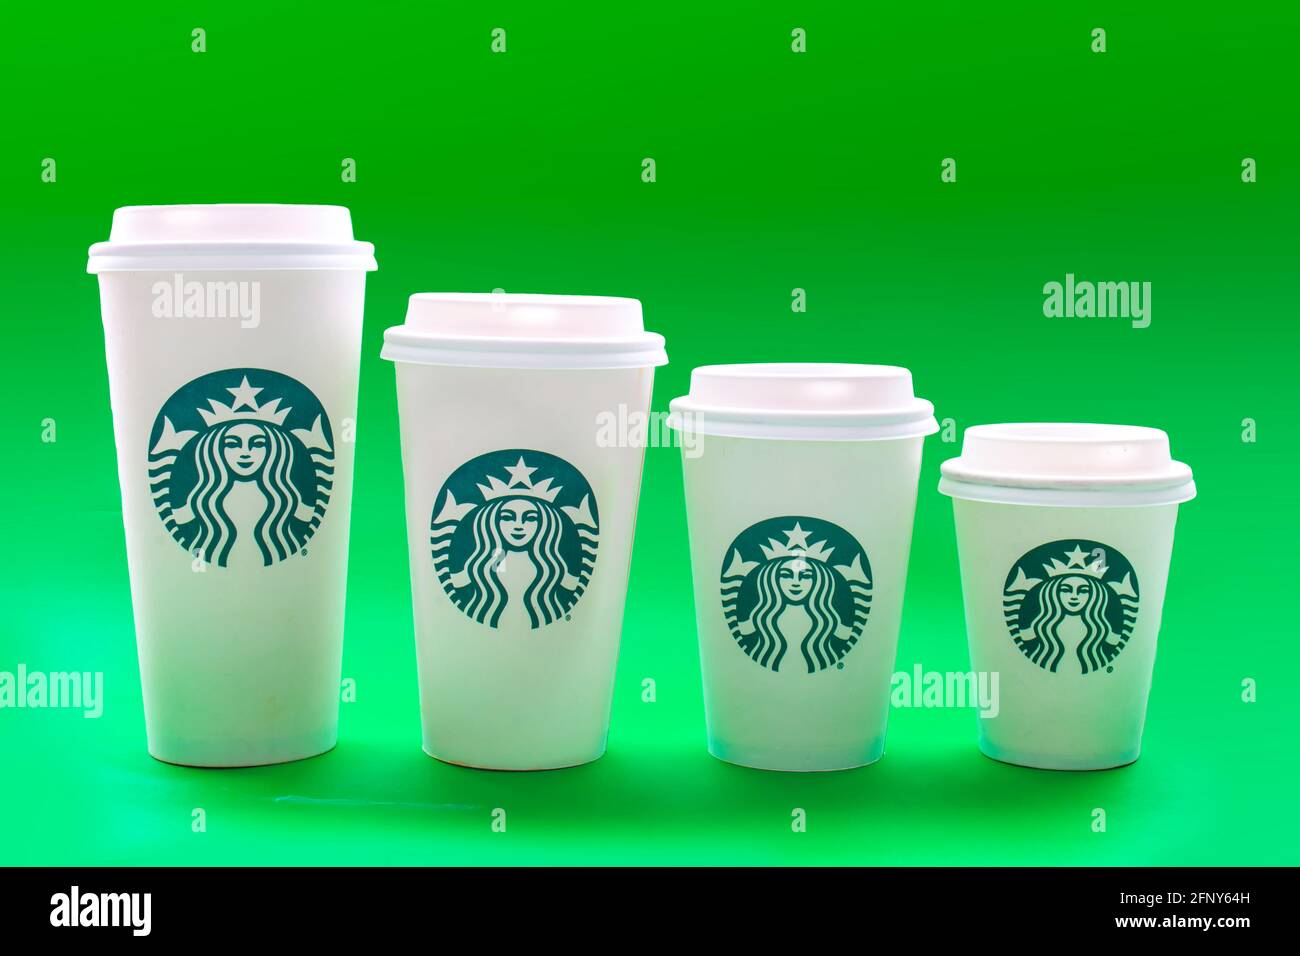 https://c8.alamy.com/comp/2FNY64H/calgary-alberta-canada-may-19-2021-starbucks-coffee-cups-of-different-sizes-on-a-green-background-2FNY64H.jpg